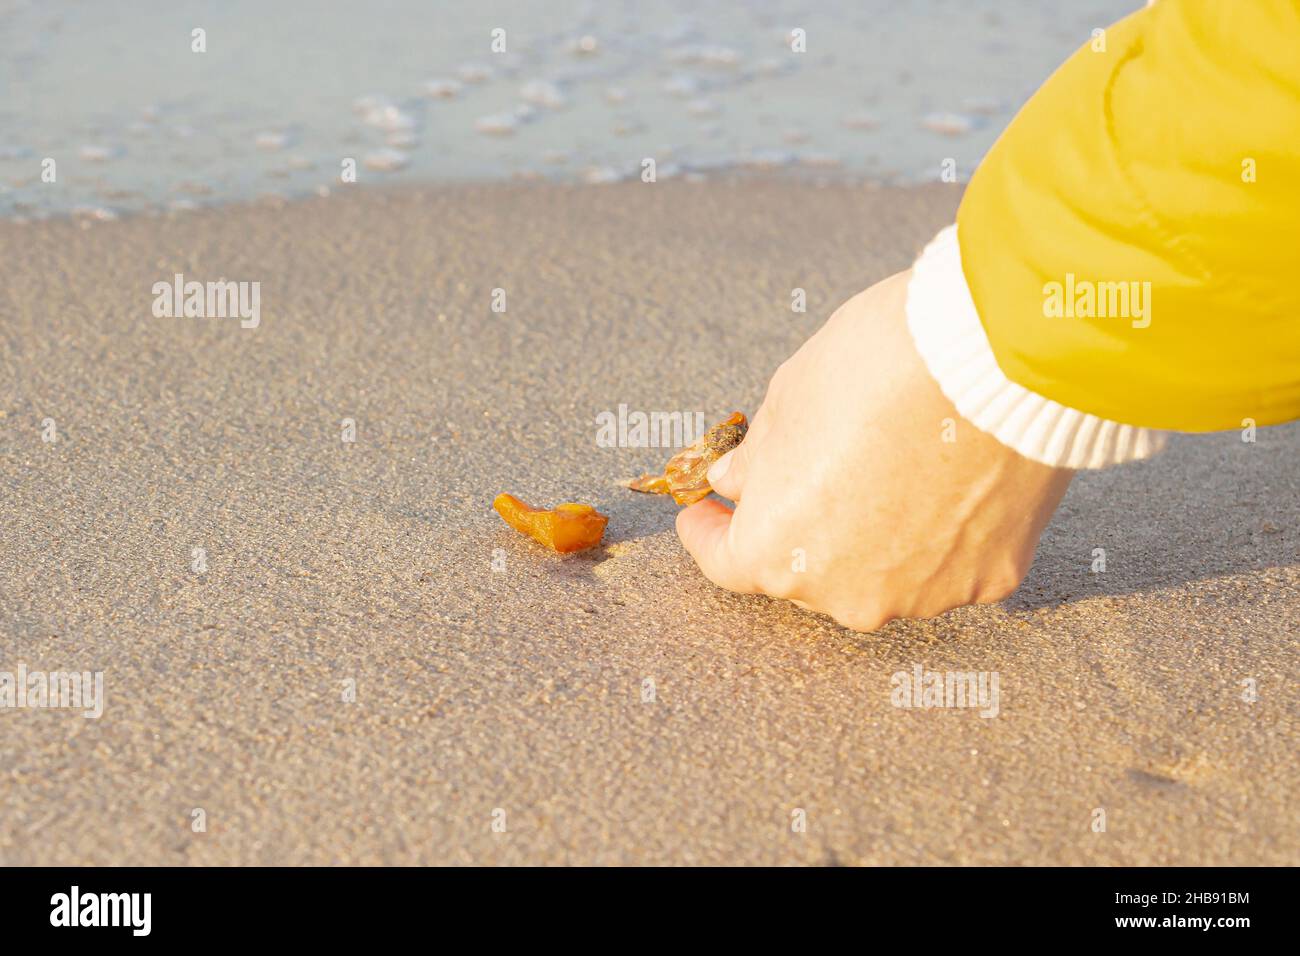 Amber on fine sand. The hand takes a piece of stone resin. A hand picks up a beautiful piece of amber from the sand Stock Photo